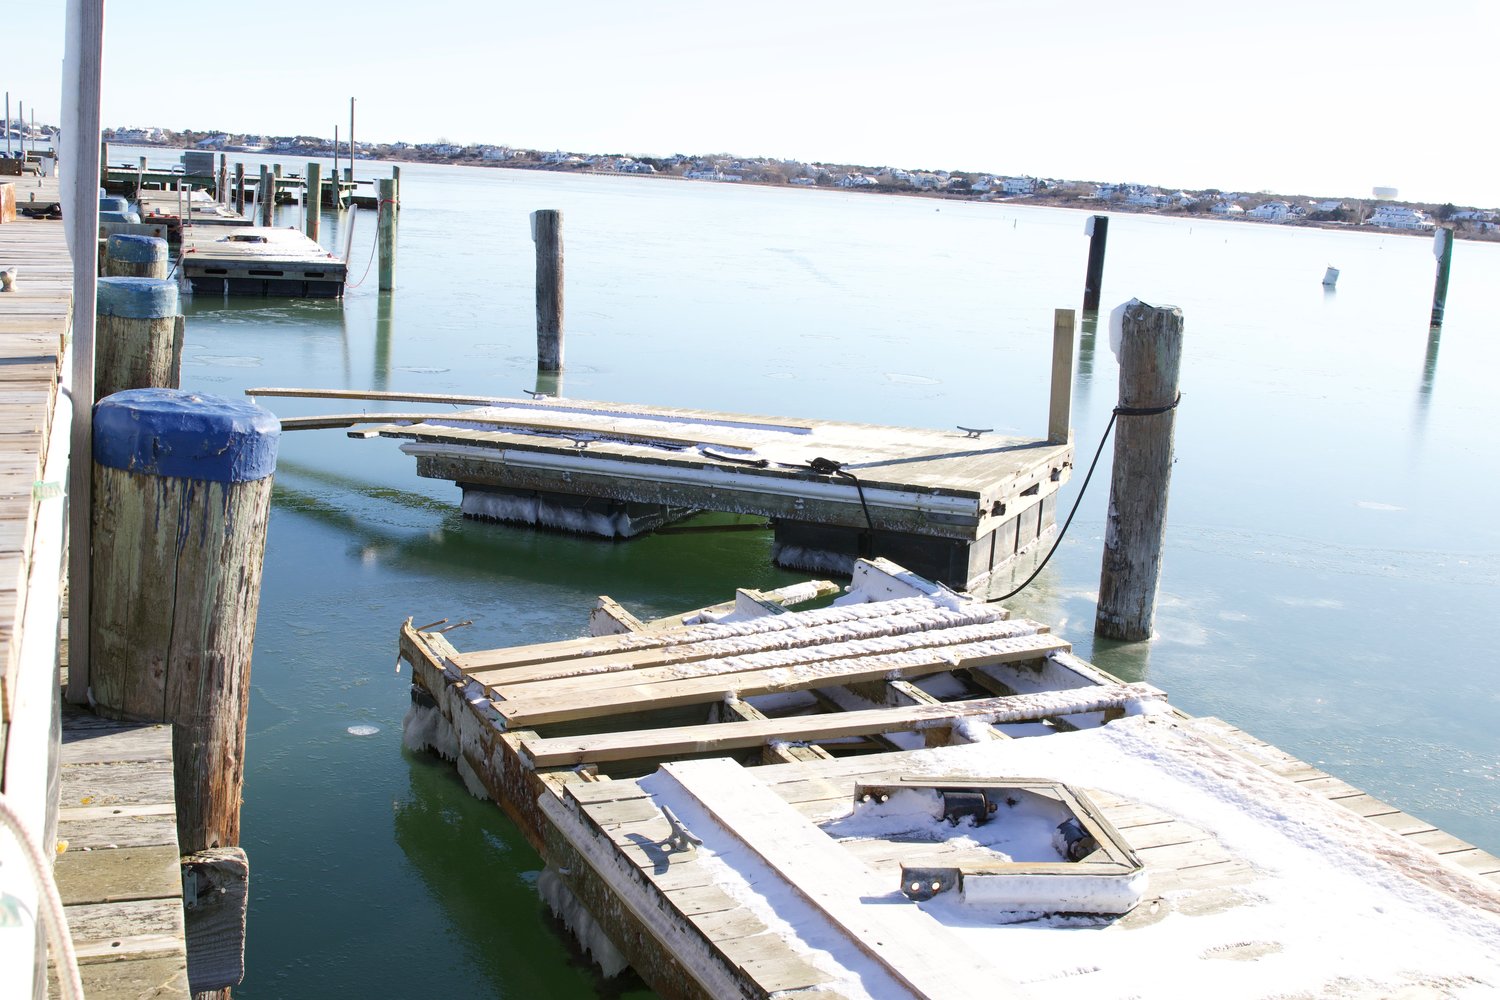 The Nantucket town pier was damaged by Saturday's high winds and storm surge.